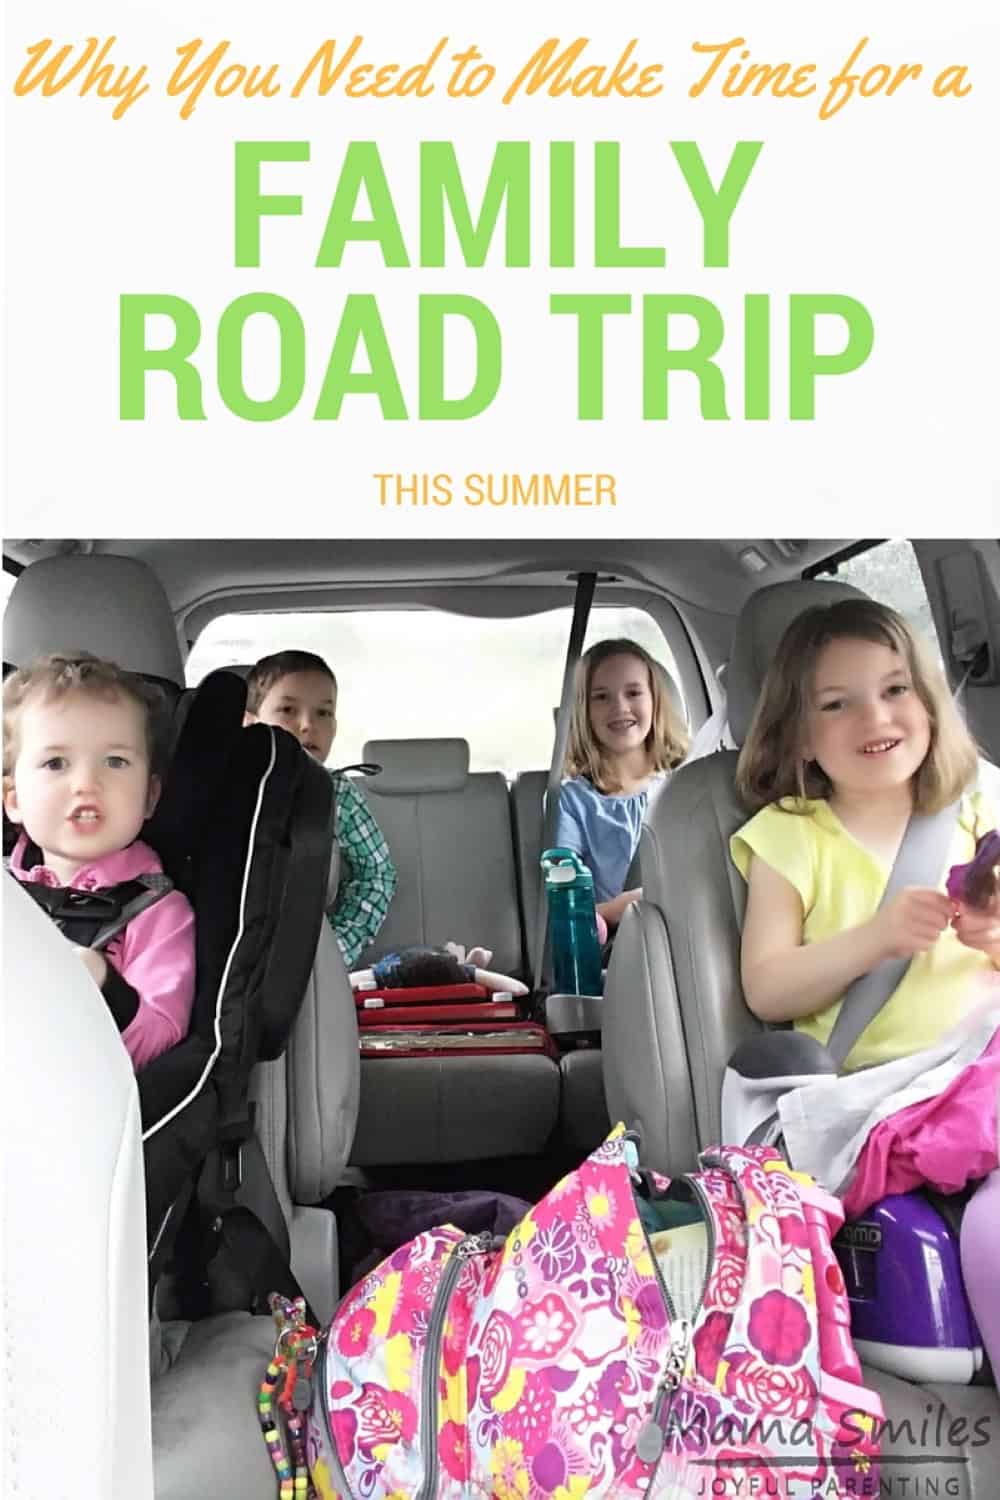 Great thoughts in this post as to why family road trips are worth the chaos!